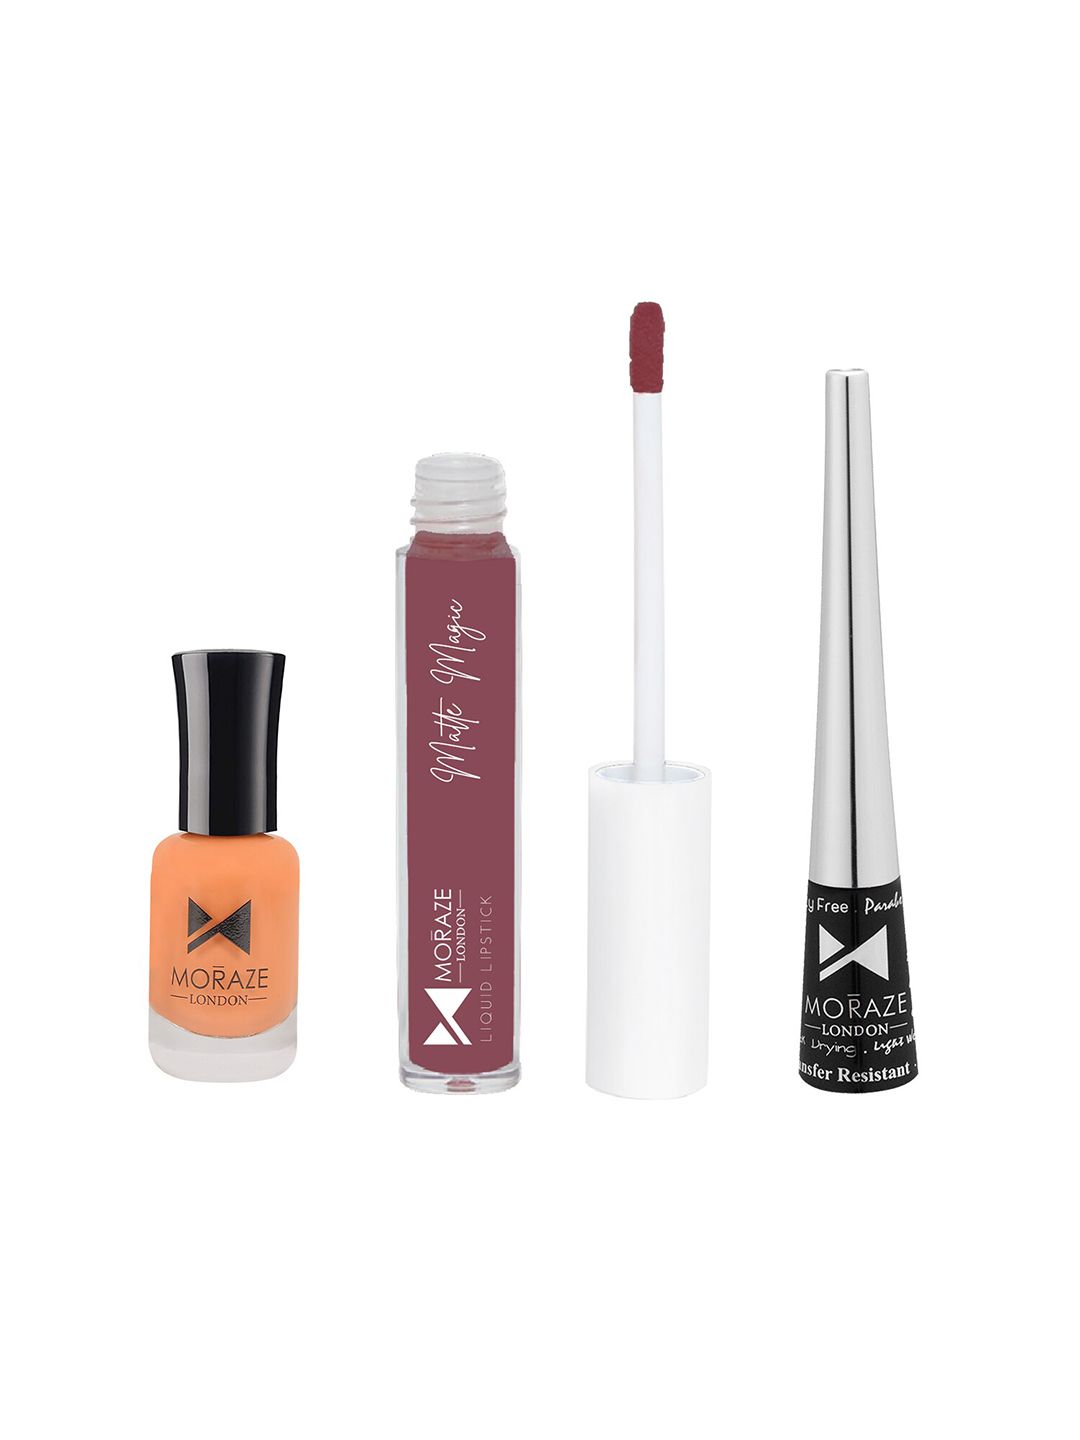 Moraze Pack Of 1 Nude Nail Polish (Autumn) With 1 Lipstick (Shades Of Love) and 1 Eyeliner Price in India